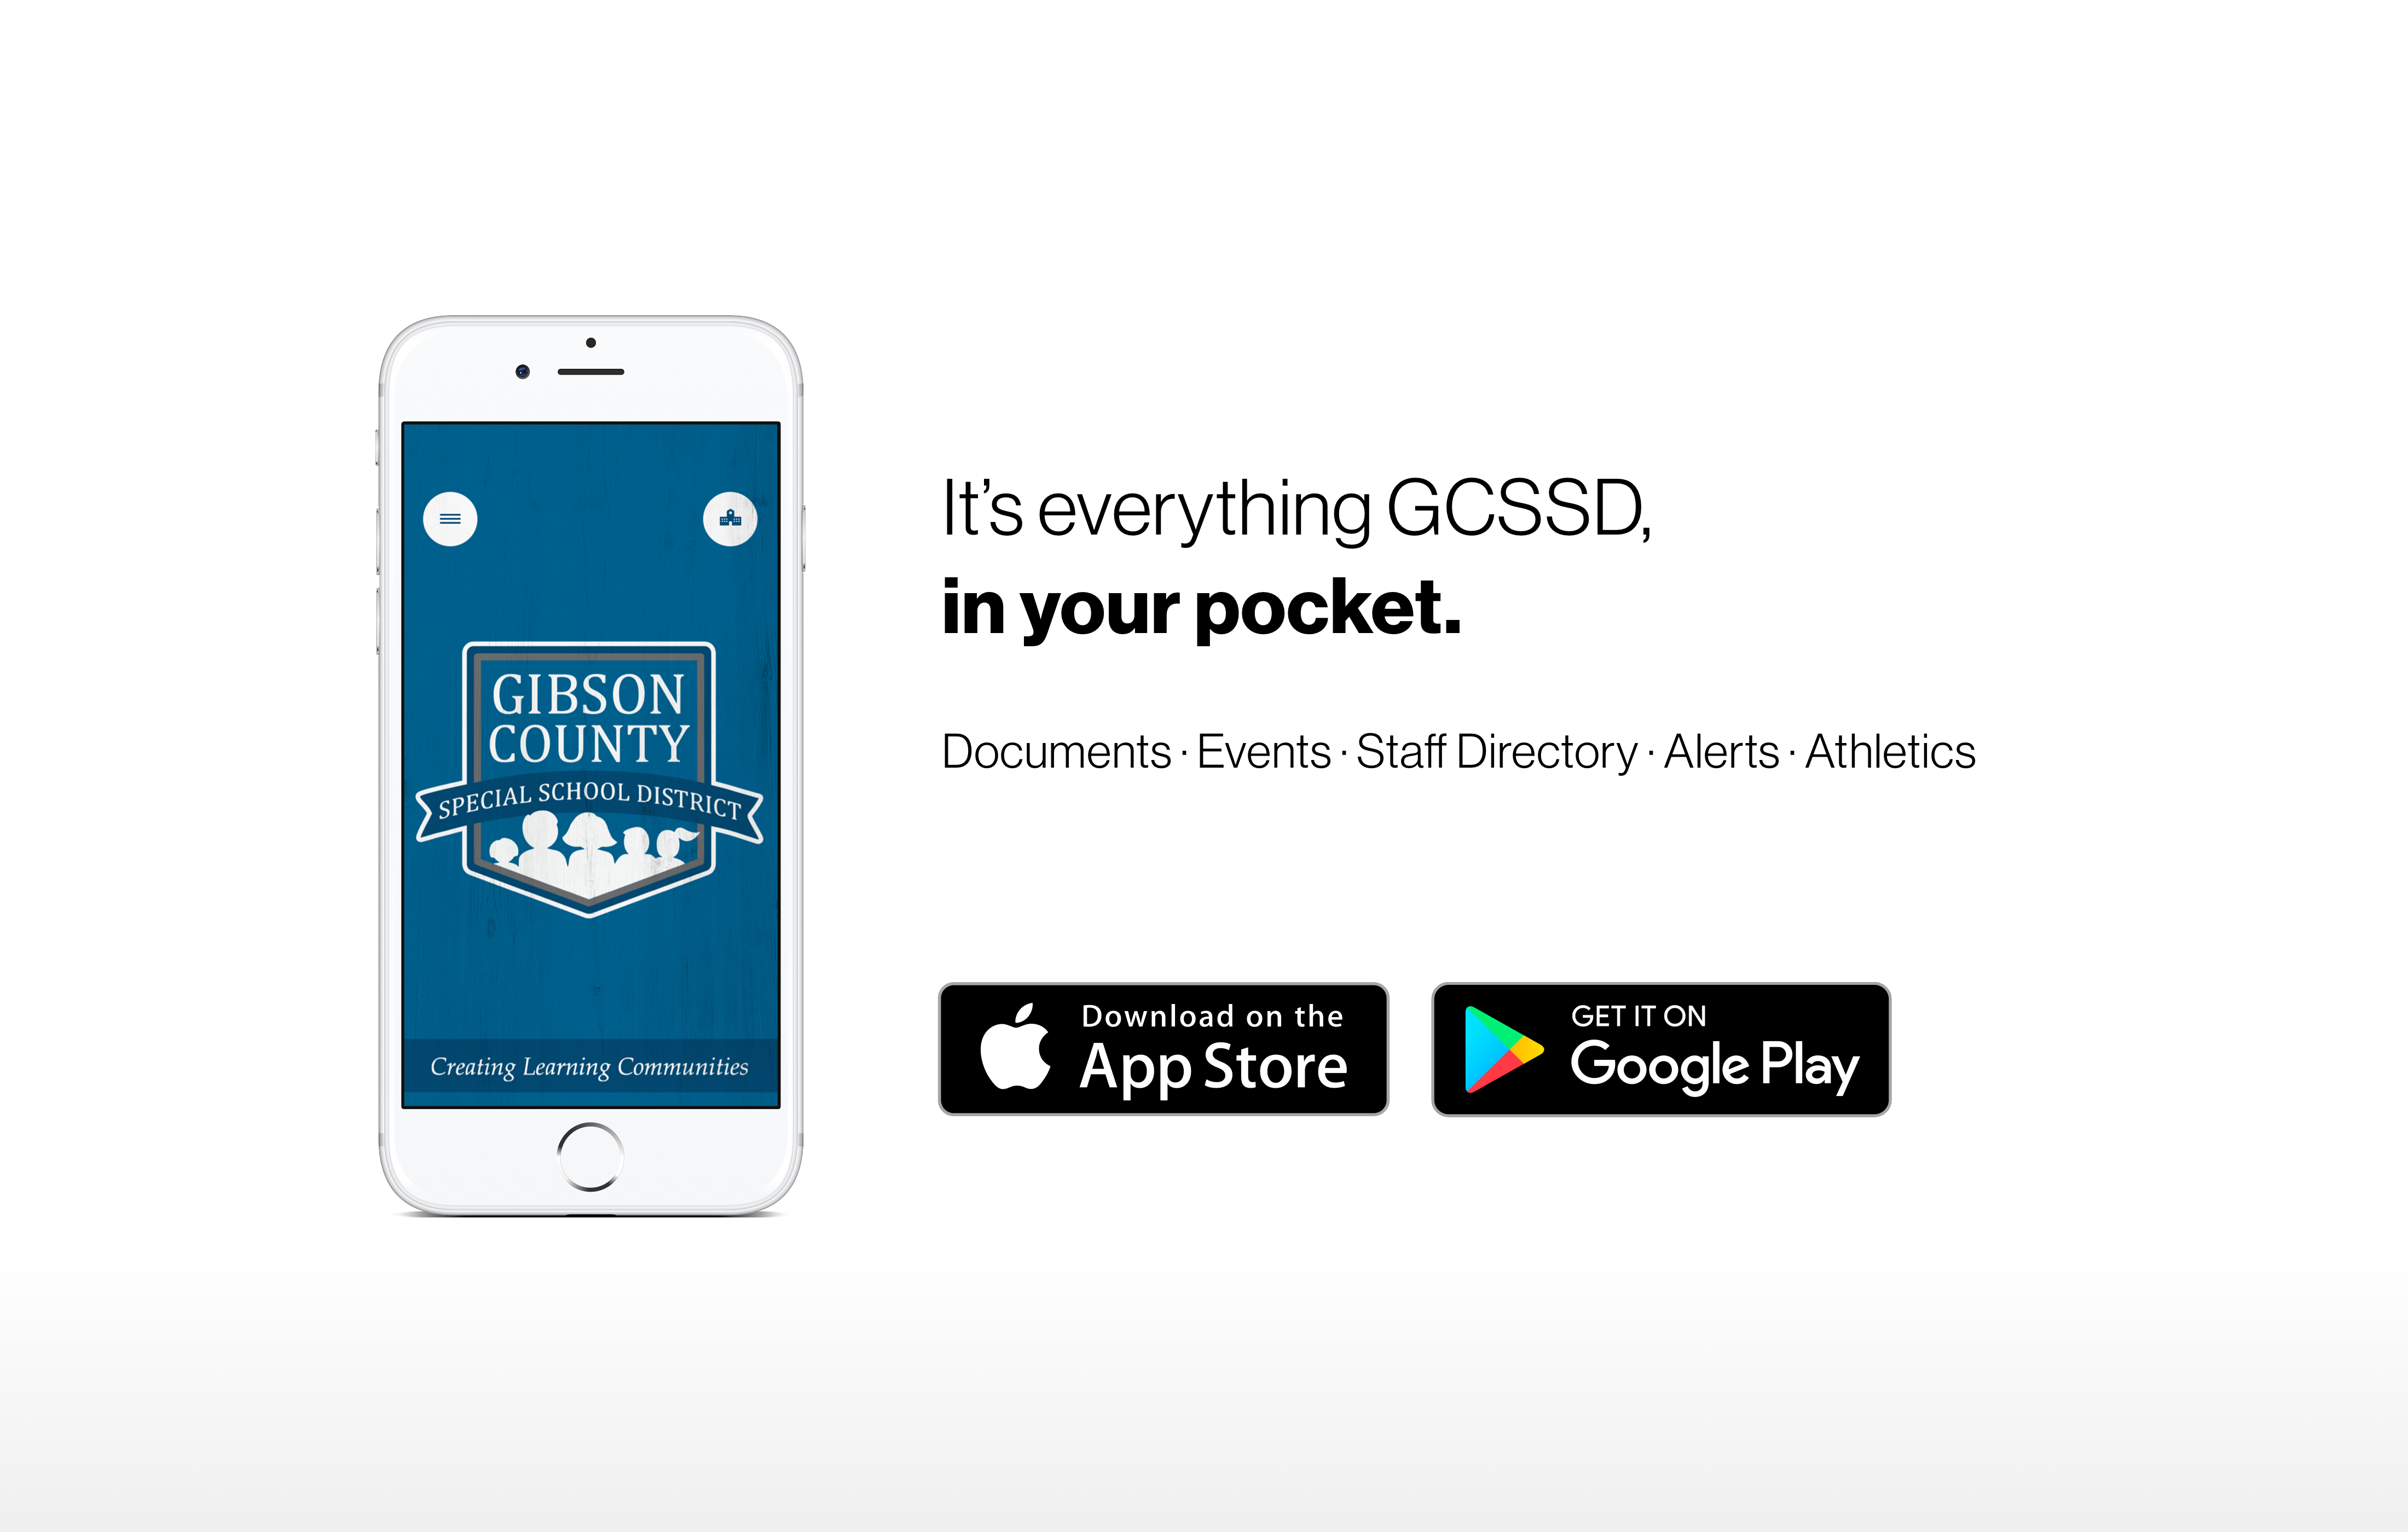 It's everything GCSSD, in your pocket!